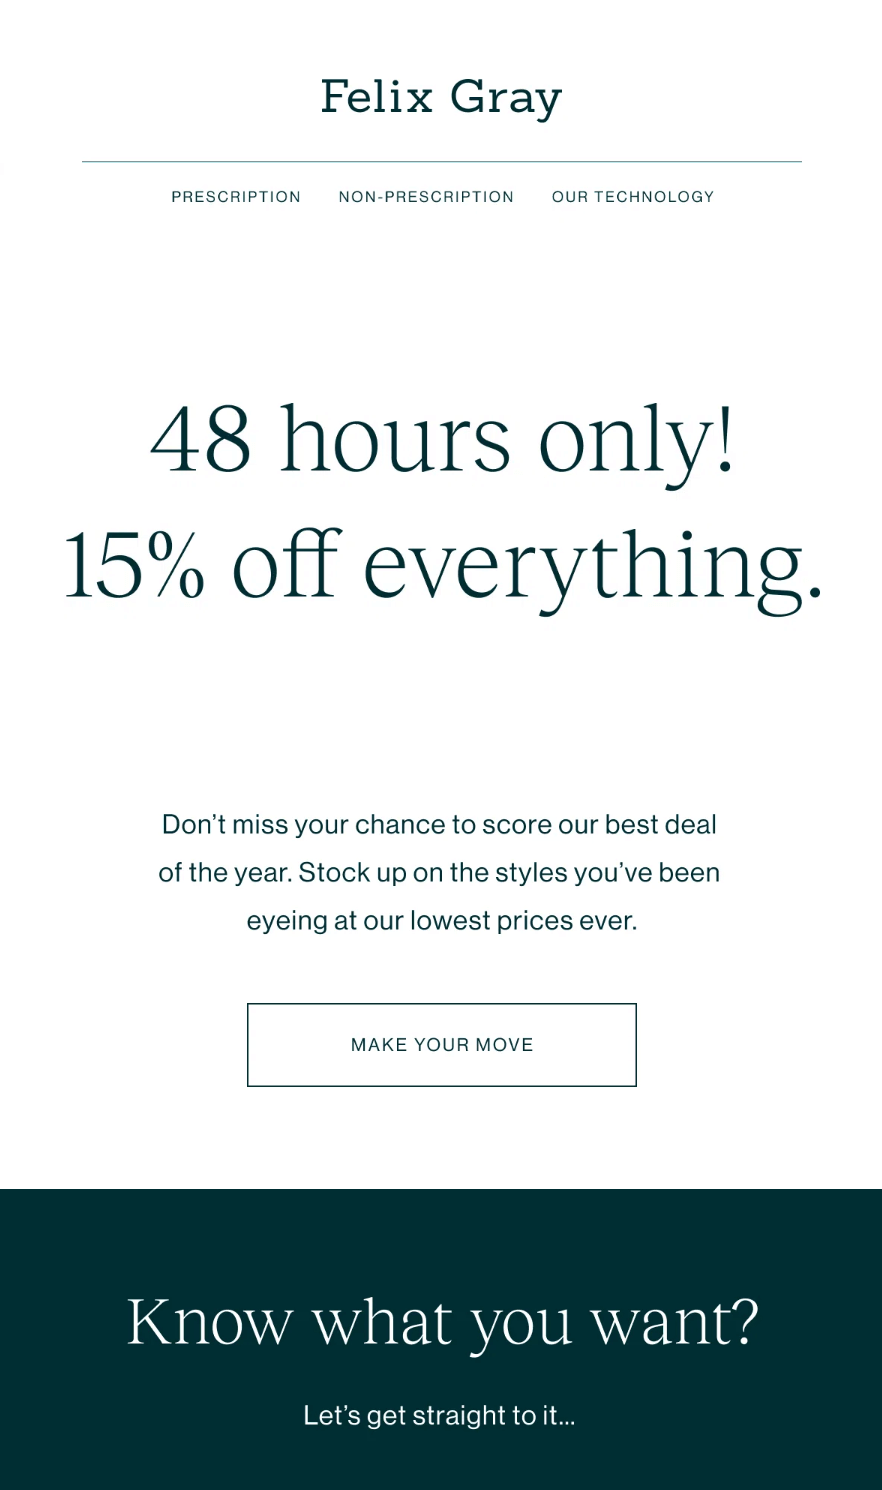 Image shows a holiday email from Felix Gray offering 15% off everything.